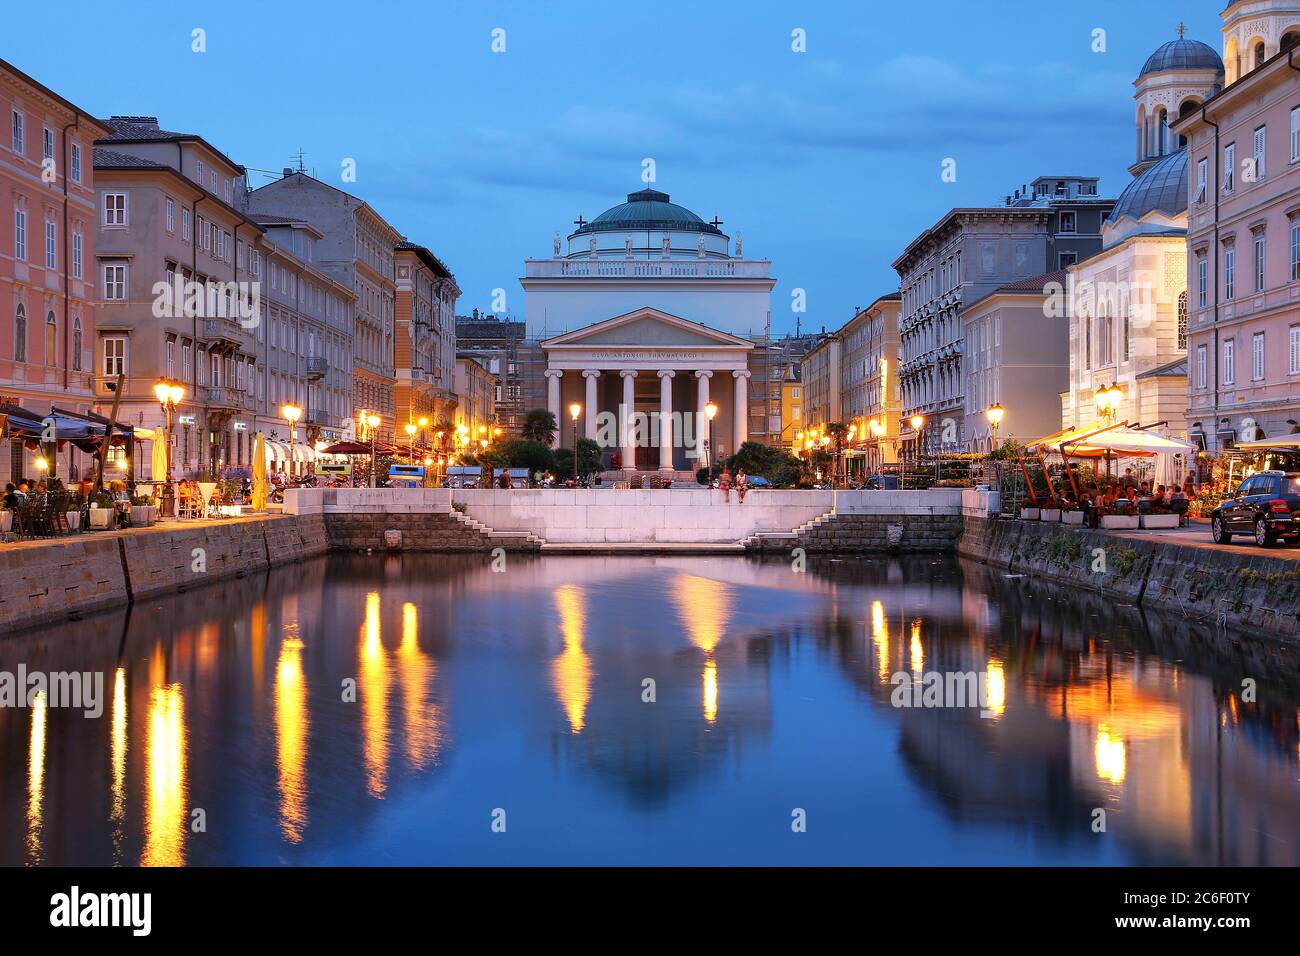 Scenic view of the Canal Grande in Trieste, Italy at night. Stock Photo